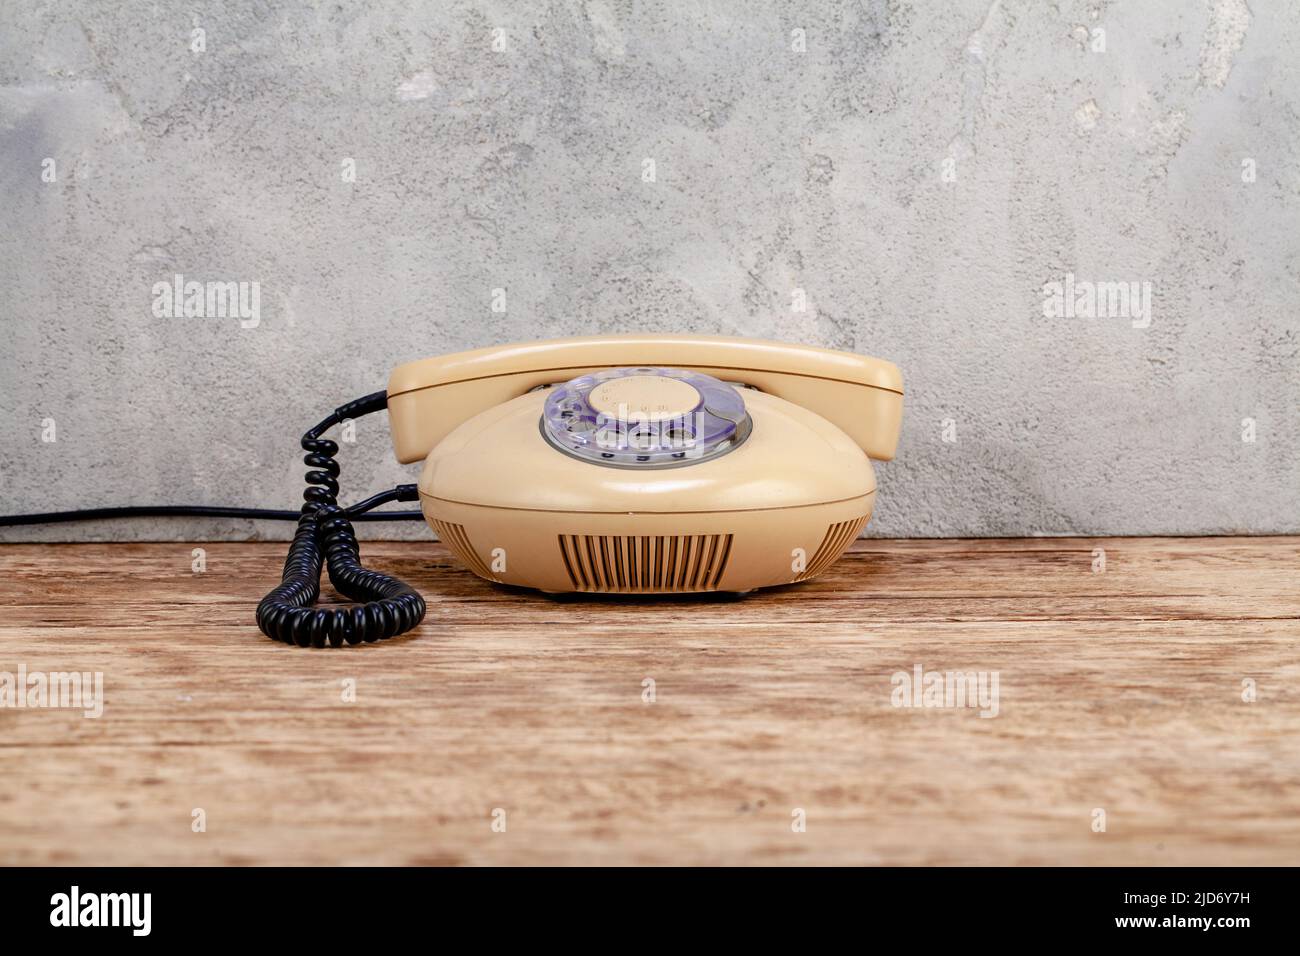 Vintage yellow rotary dial telephone on wooden table in front gray concrete background Stock Photo